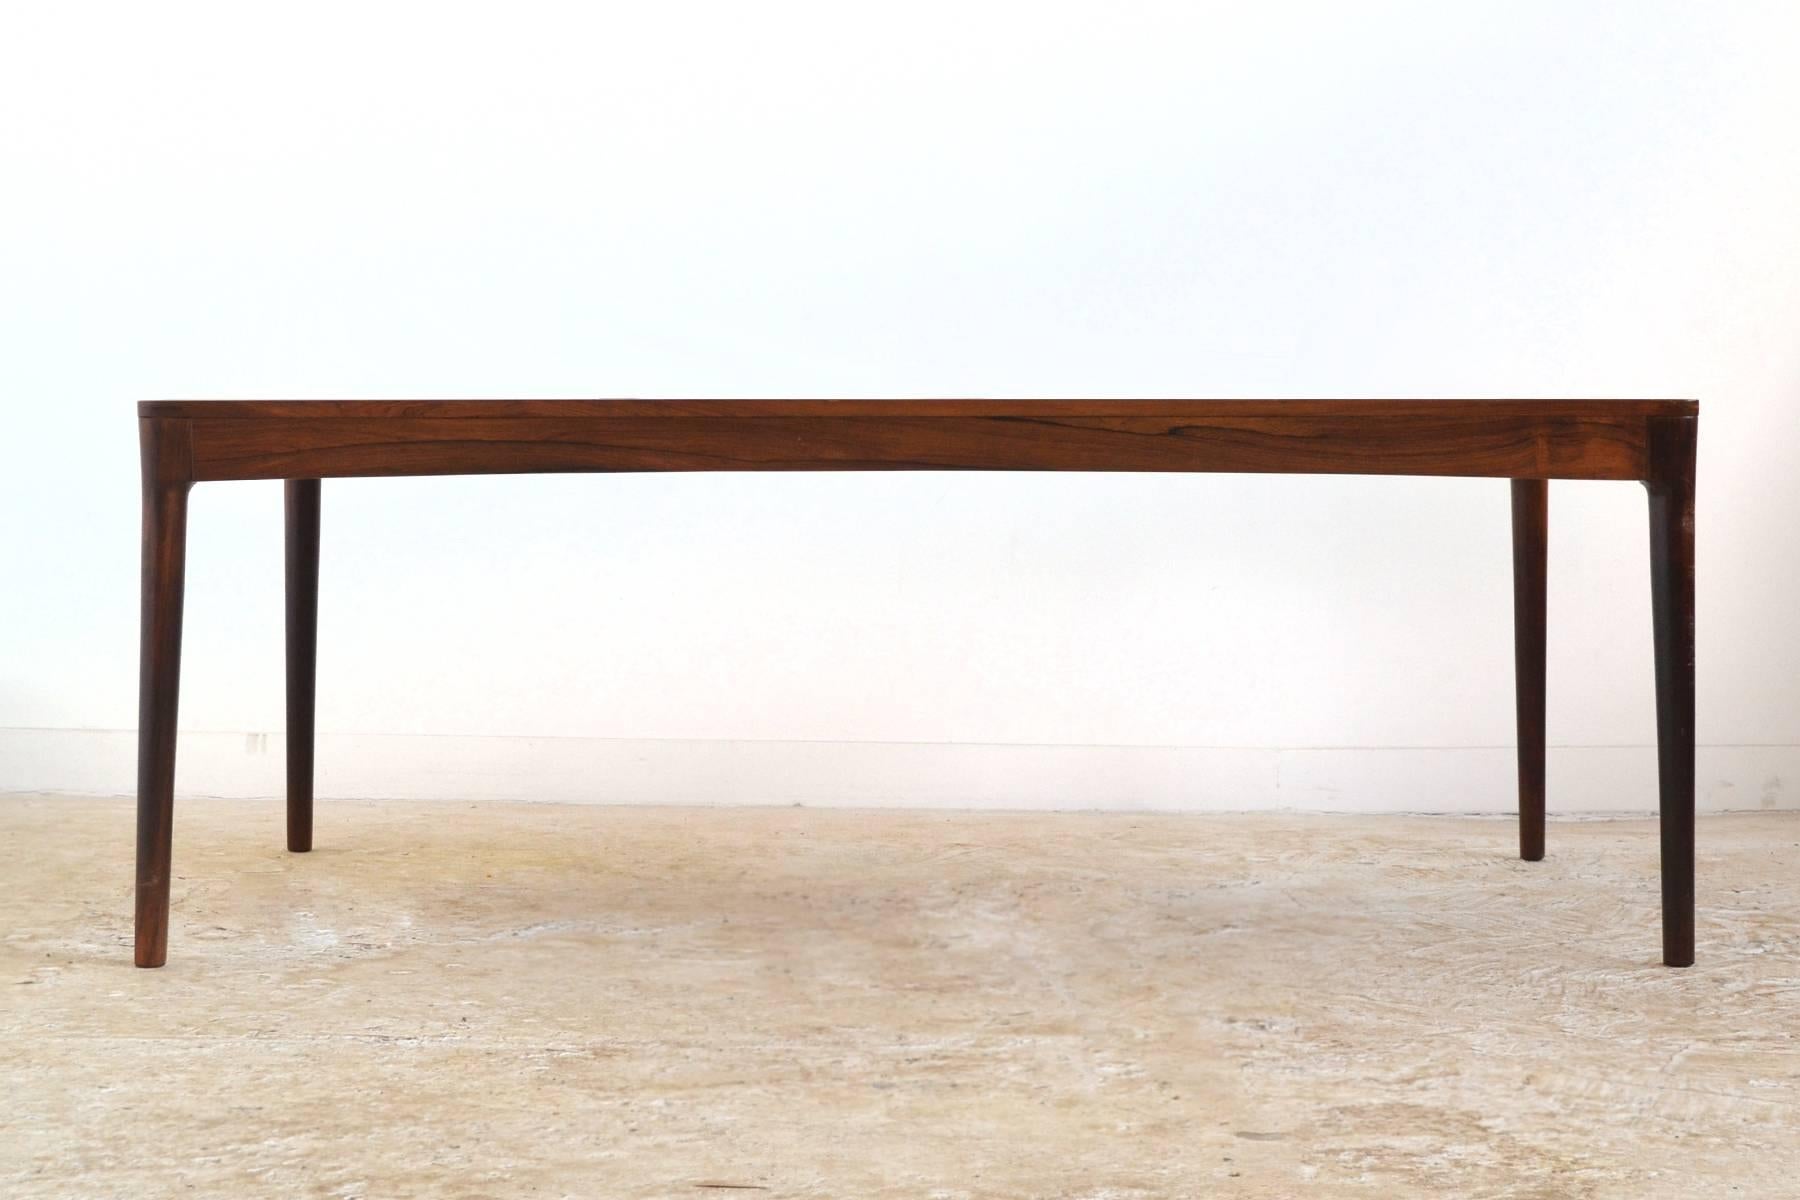 Like so much of the best Danish design, this table is a study in subtle beauty and expert craftsmanship. A substantial table, it is made of rich rosewood sculpted in graceful lines with visible joinery and fine details.